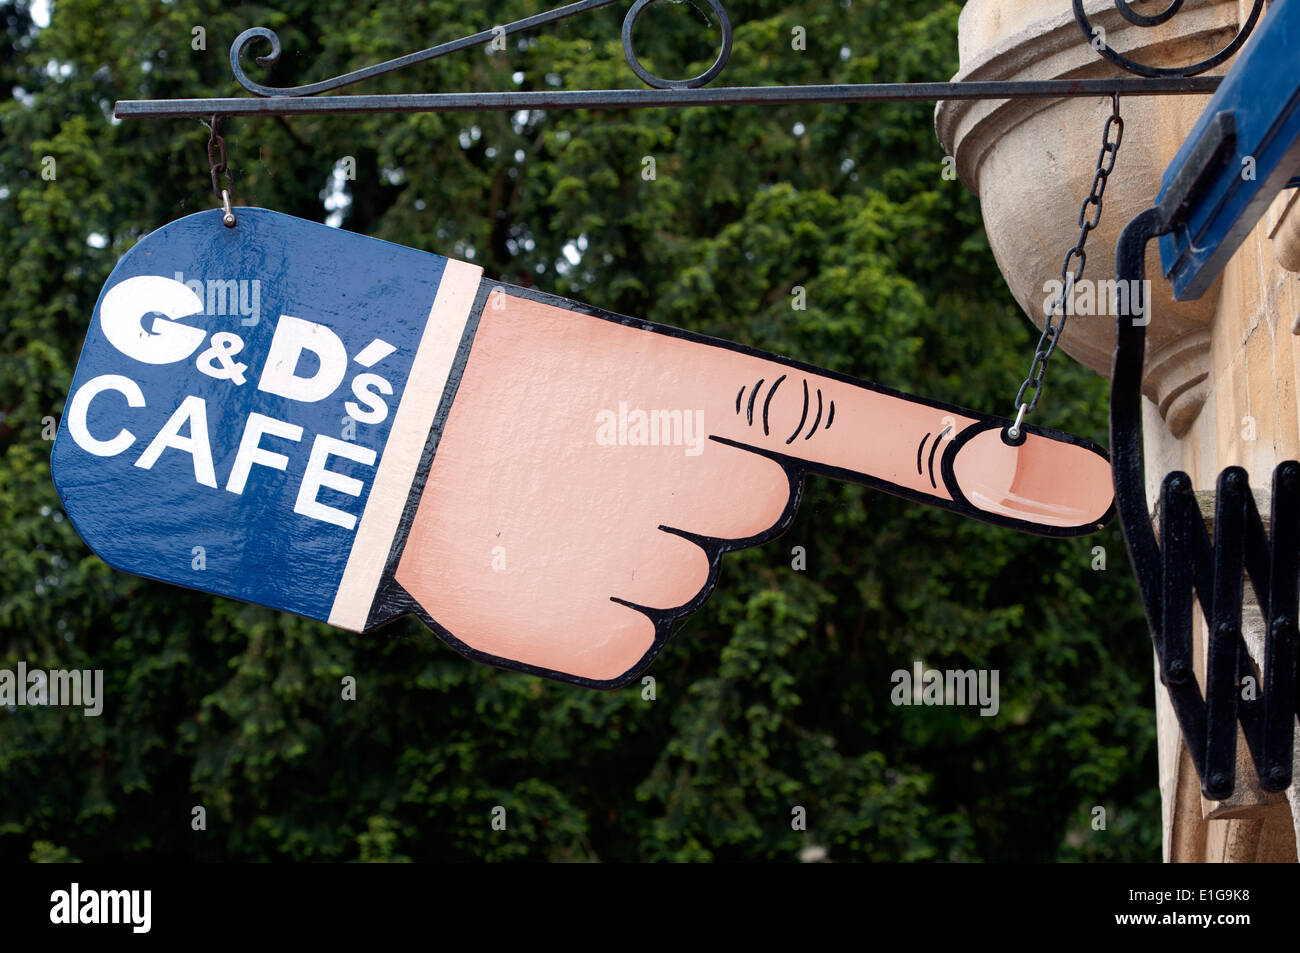 G & D`s cafe sign, Oxford, UK Stock Photo